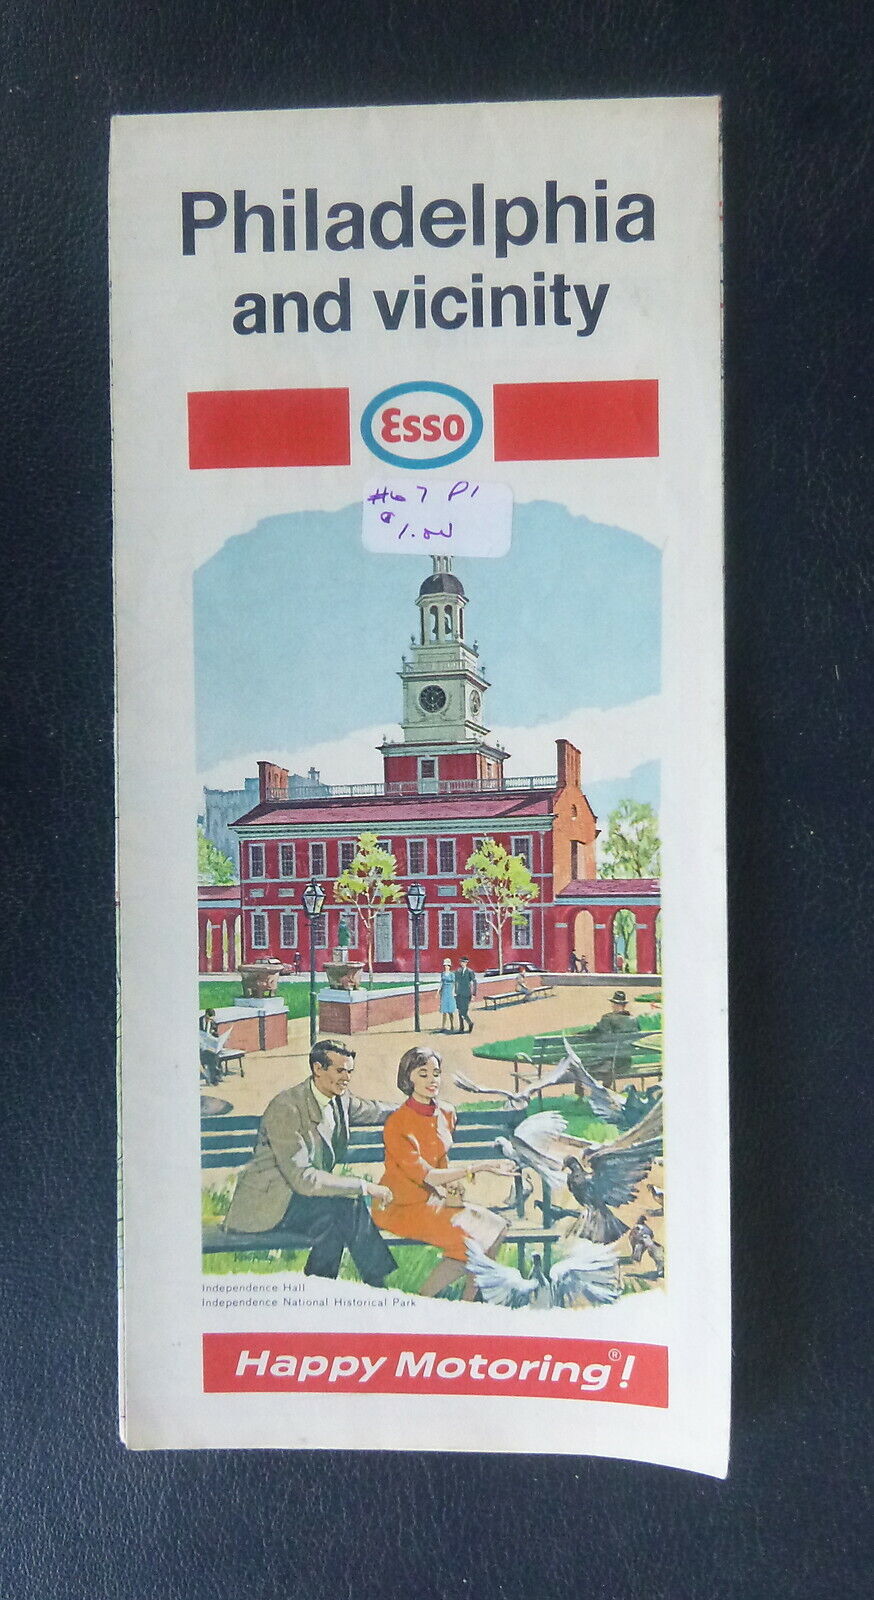 1969 Philadelphia metro road map Esso oil gas downtown streets Independence Hall